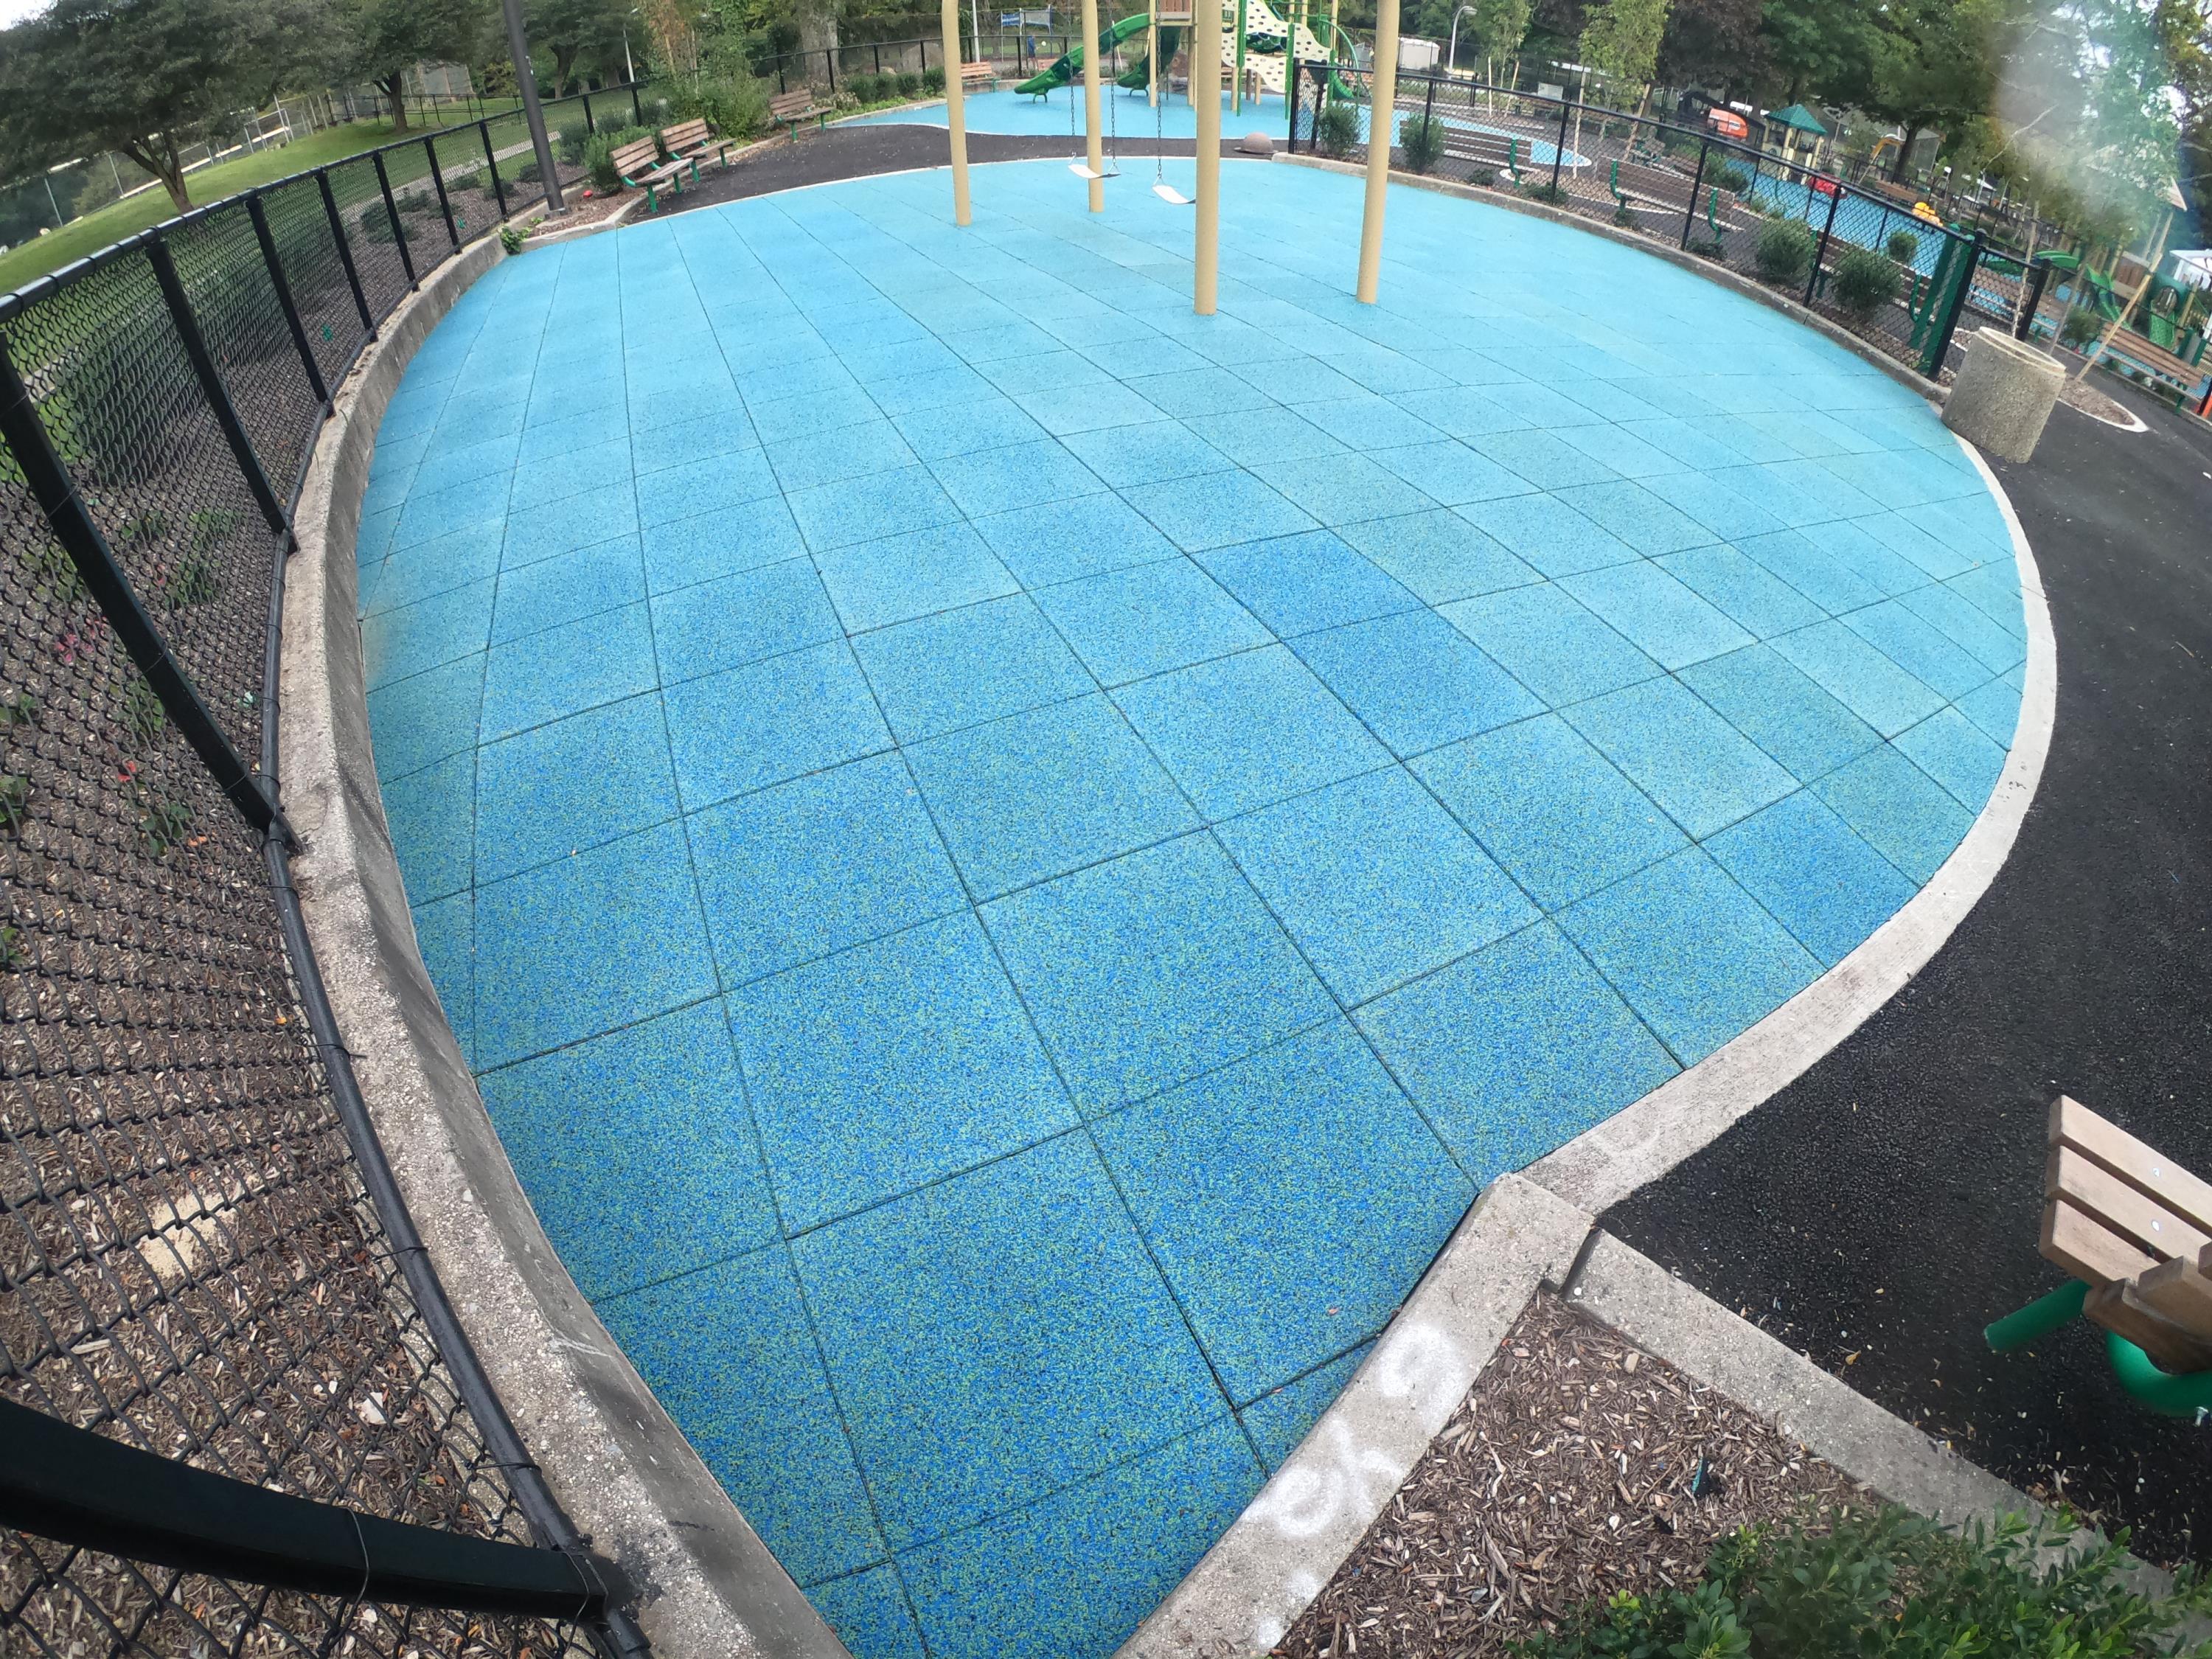 County Park Playground = Using TPV Top Tiles w50% Blue 45% Green 5% Black n